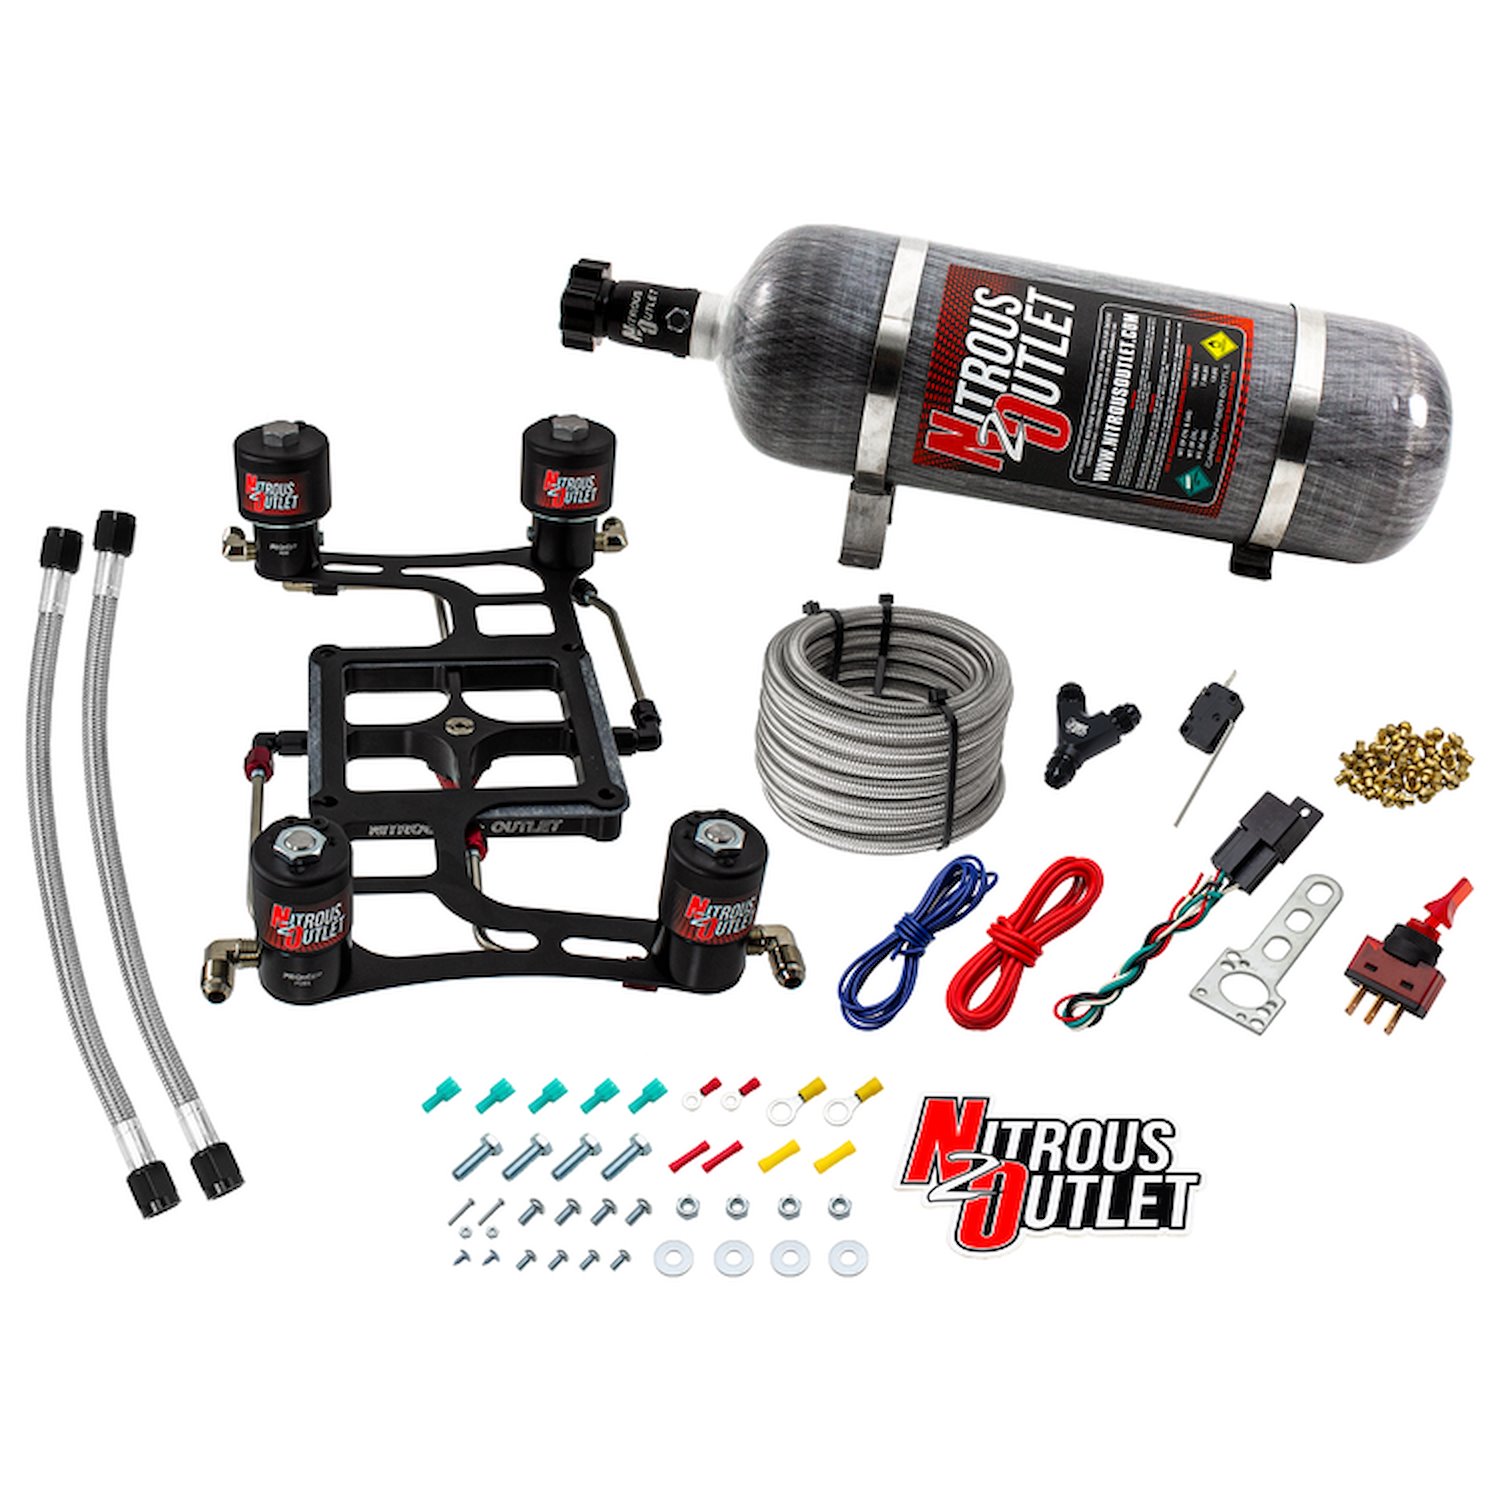 00-10640-12 4500 Hornet 2 Race Dual-Stage System, Hard-Line